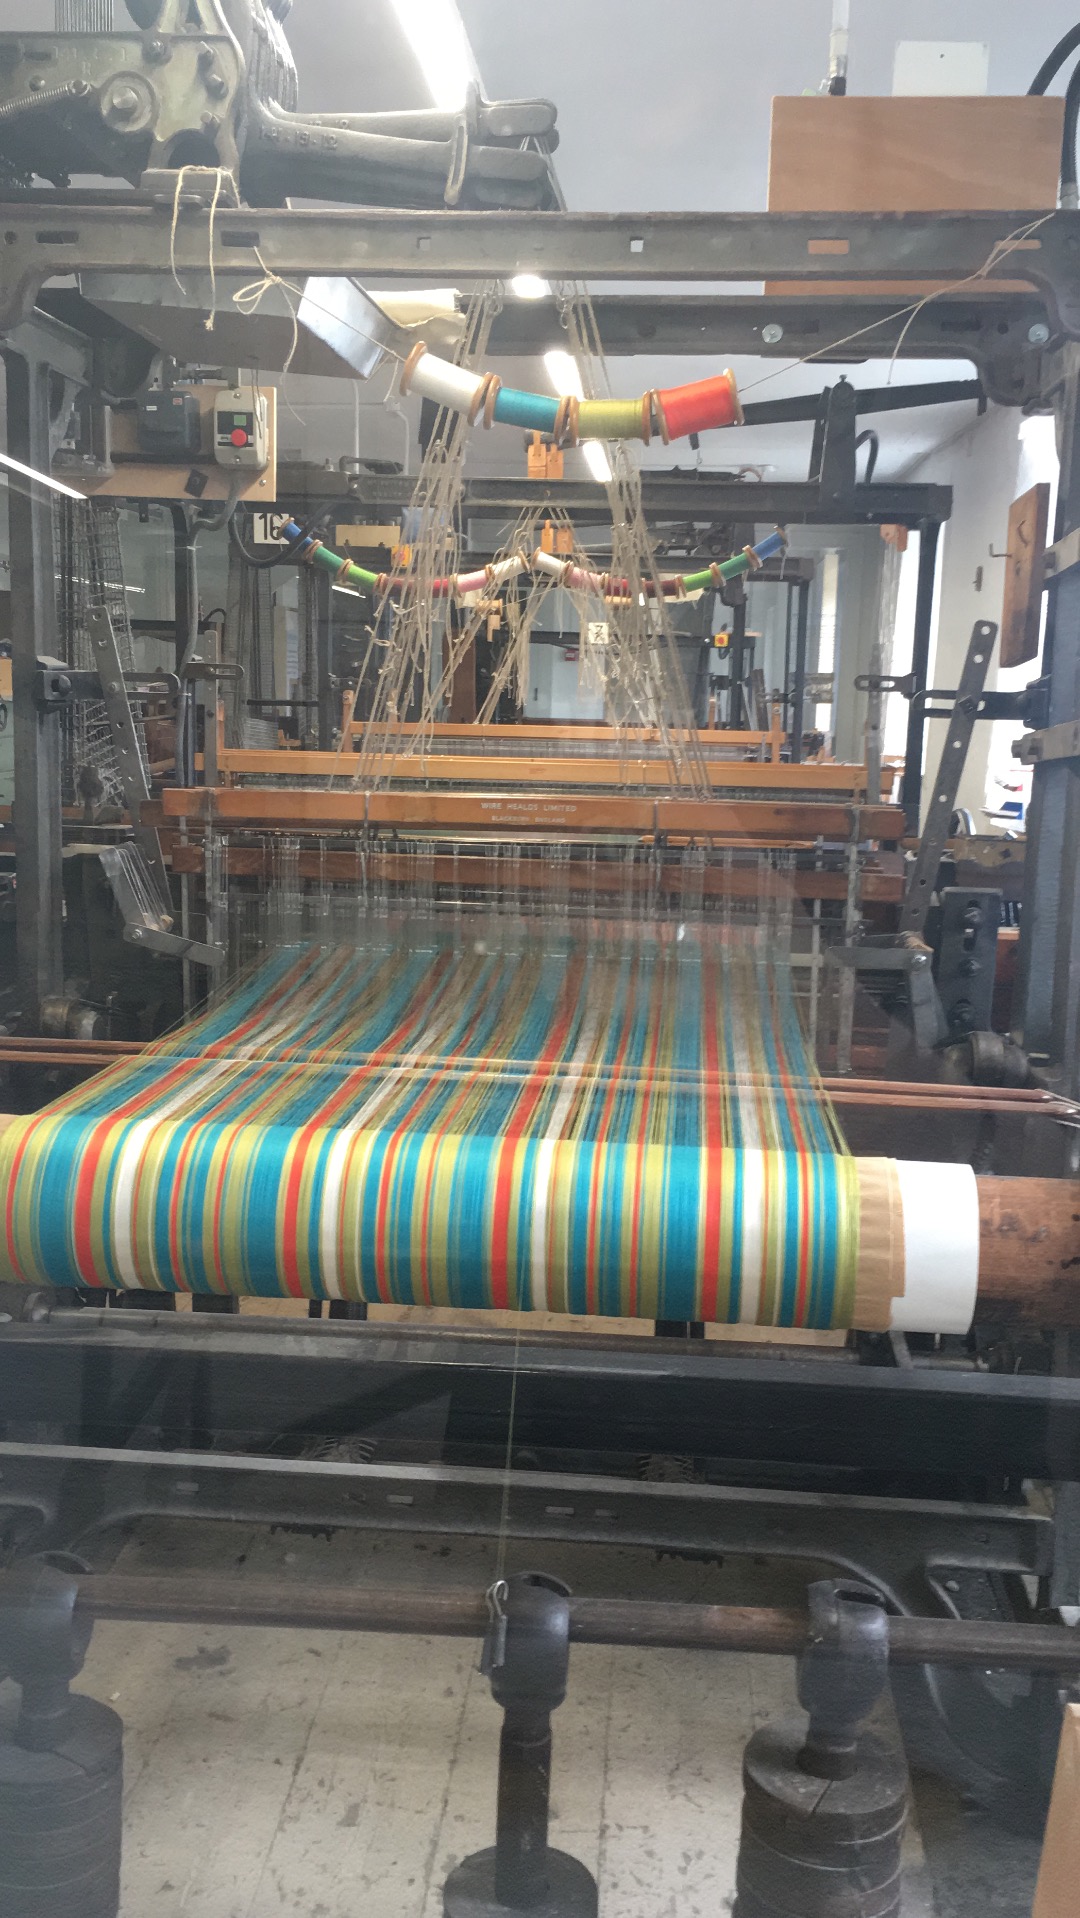 19th Century Loom made by William Smith and Borthers.